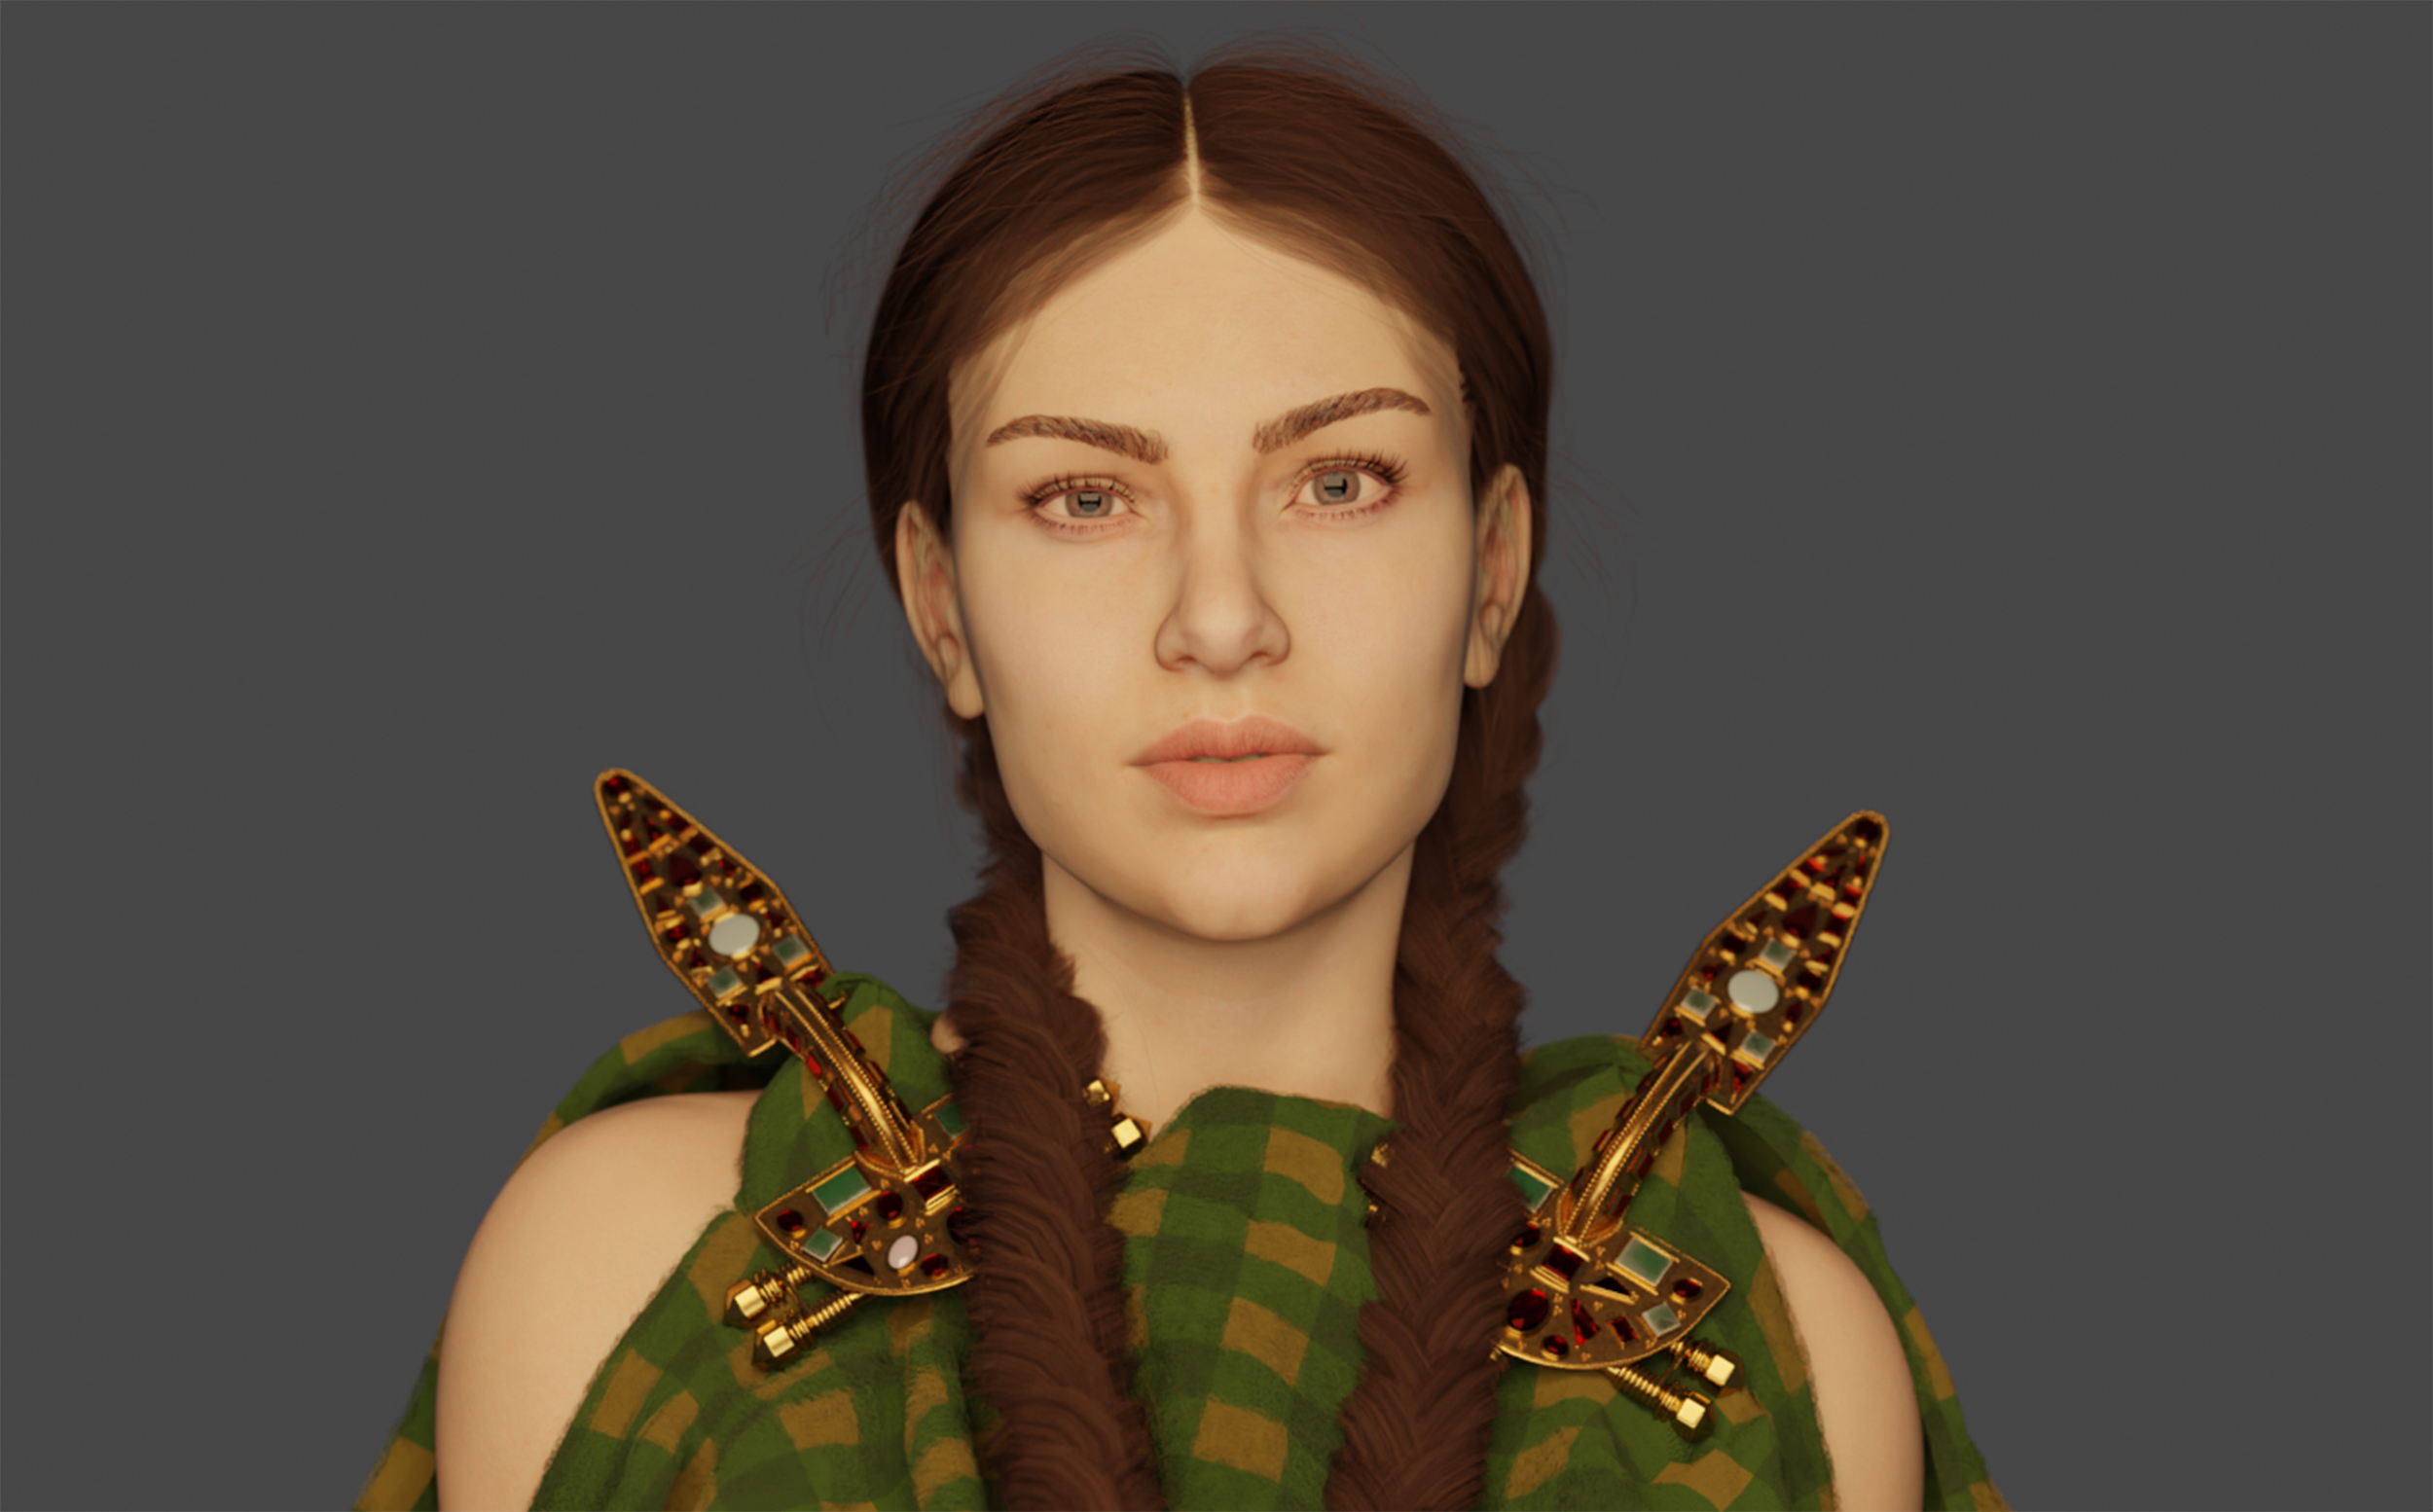 3D Graphic of a woman wearing polychrome fibulae from the 6th century burial of Untersiebenbrunn, Austria. Copy right, the author (Mike Pole).